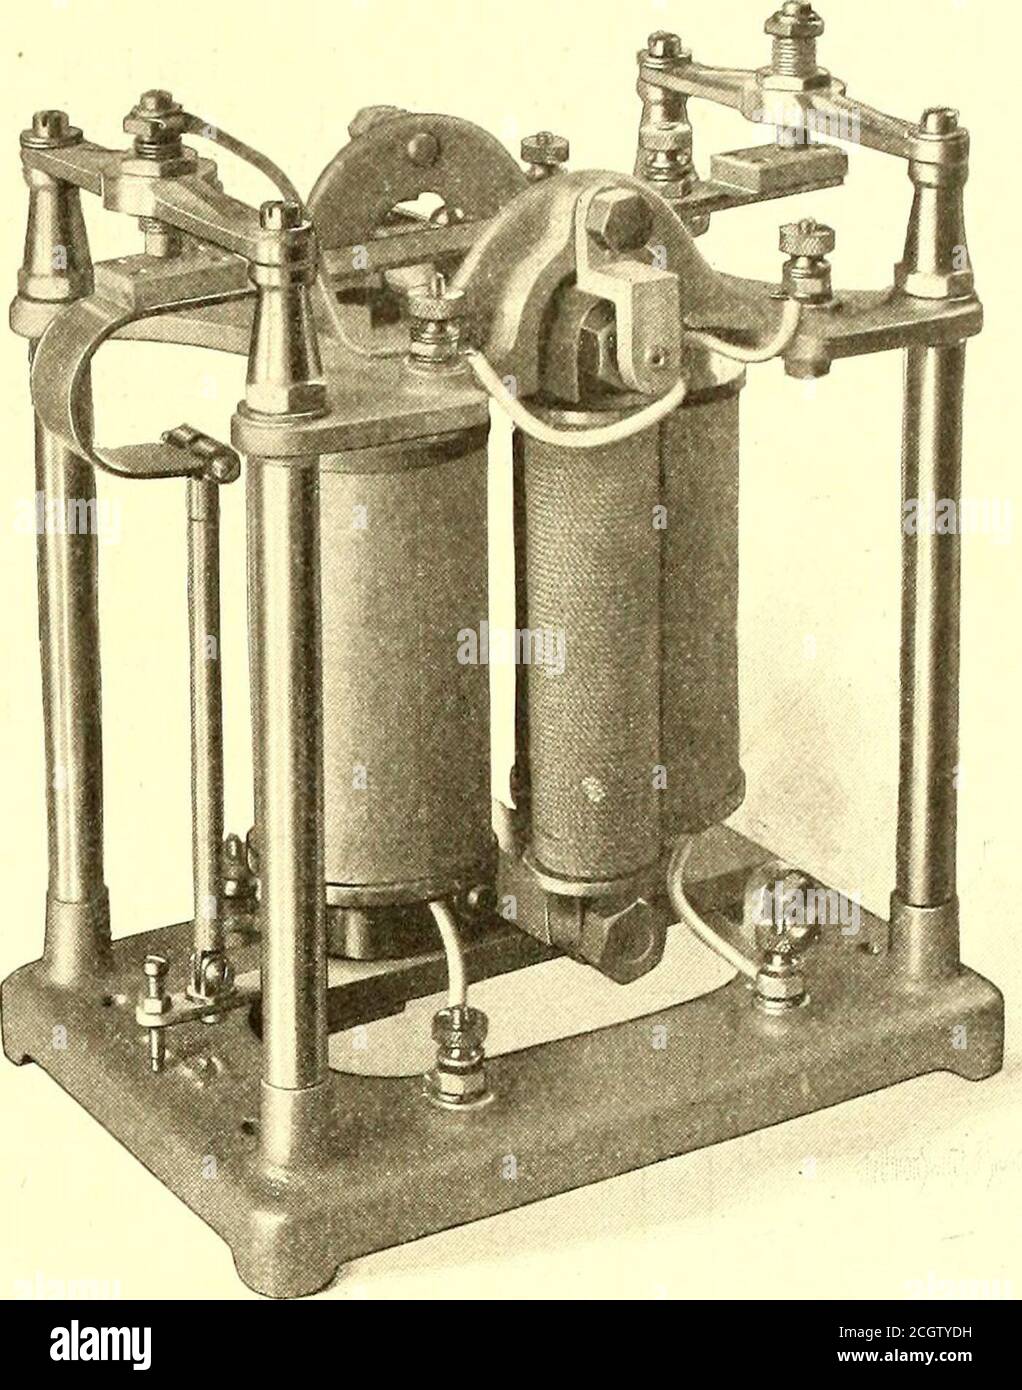 . The Street railway journal . FIG. 4.—SIGNAL PEDESTAL CONTAINING POLARIZEDRELAY, RESISTANCE COILS, ETC. age from rail to rail, which would be so large with the highvoltage used as to give false indications by opening thetrack relays. On the other hand, if the track voltage bemade low, as in steam road practice, the interference of the500-volt current would be prohibitive. On an elevatedand underground road of this kind, however, where trackleakage can be kept down there is nothing against its use save the loss of conductivity in the return circuit due togiving up one rail to block signaling p Stock Photo